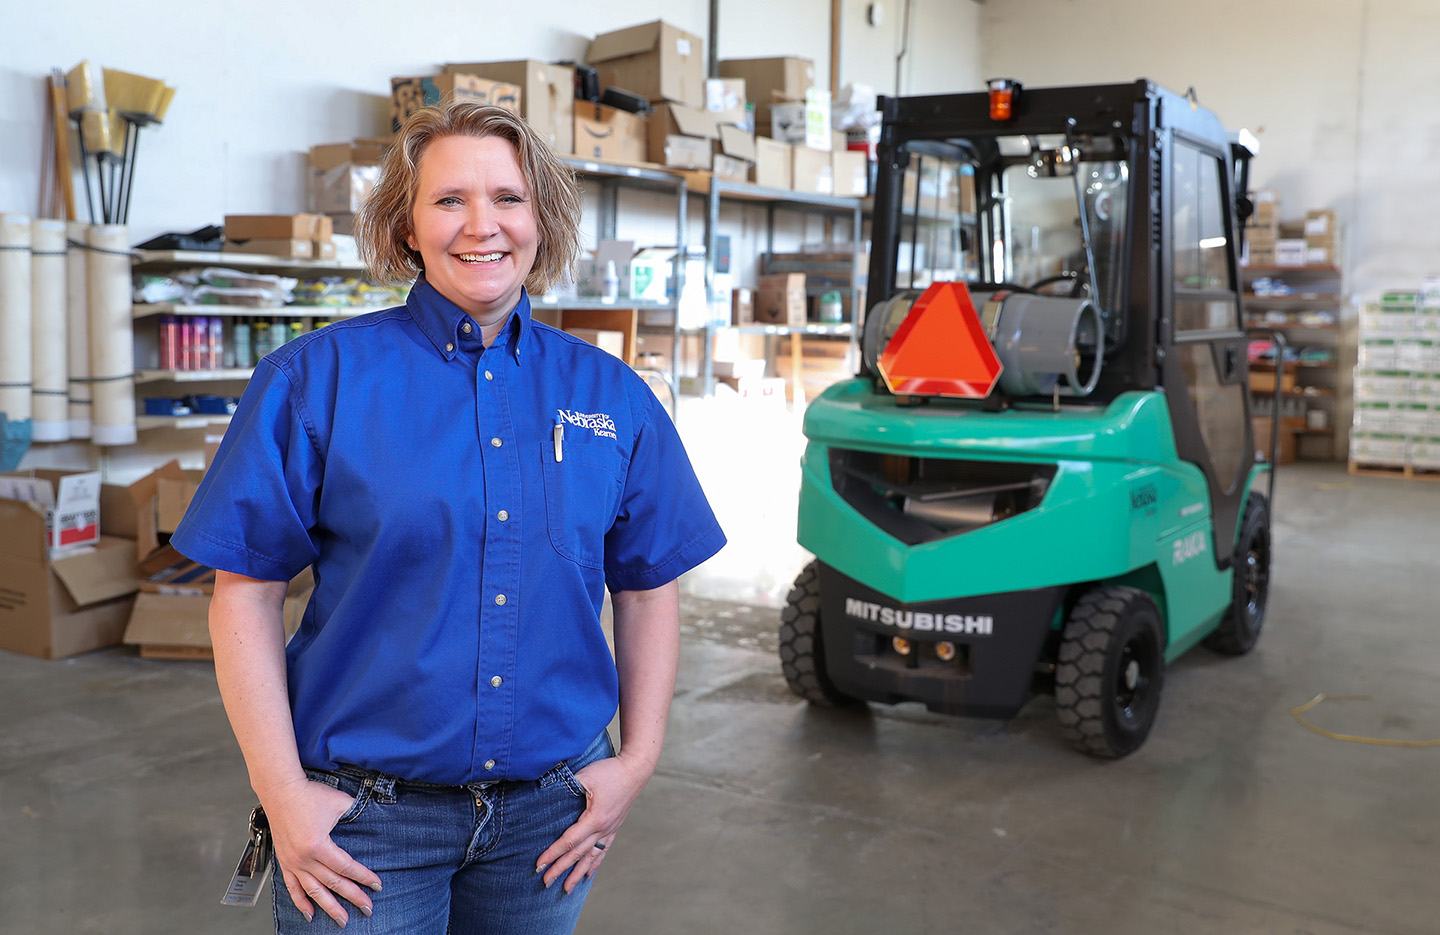 Now a college graduate, Kimberley Orcutt plans to continue working at UNK, where she’s the supply control supervisor with Facilities Management and Planning.